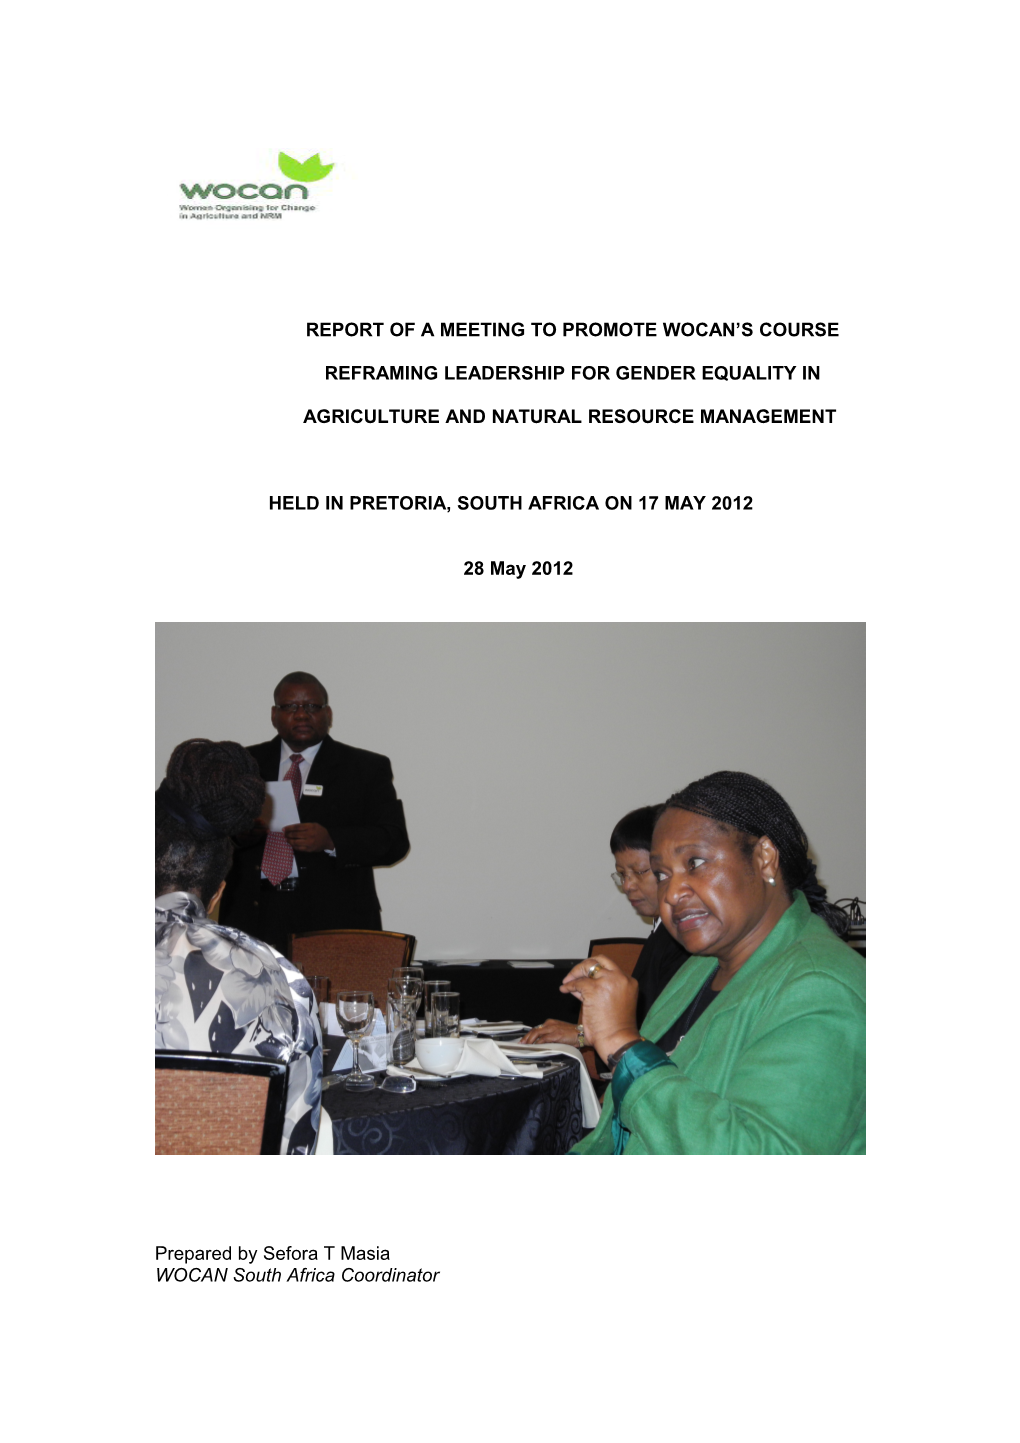 Final Report on Meeting to Promote Wocan's Leadership Course